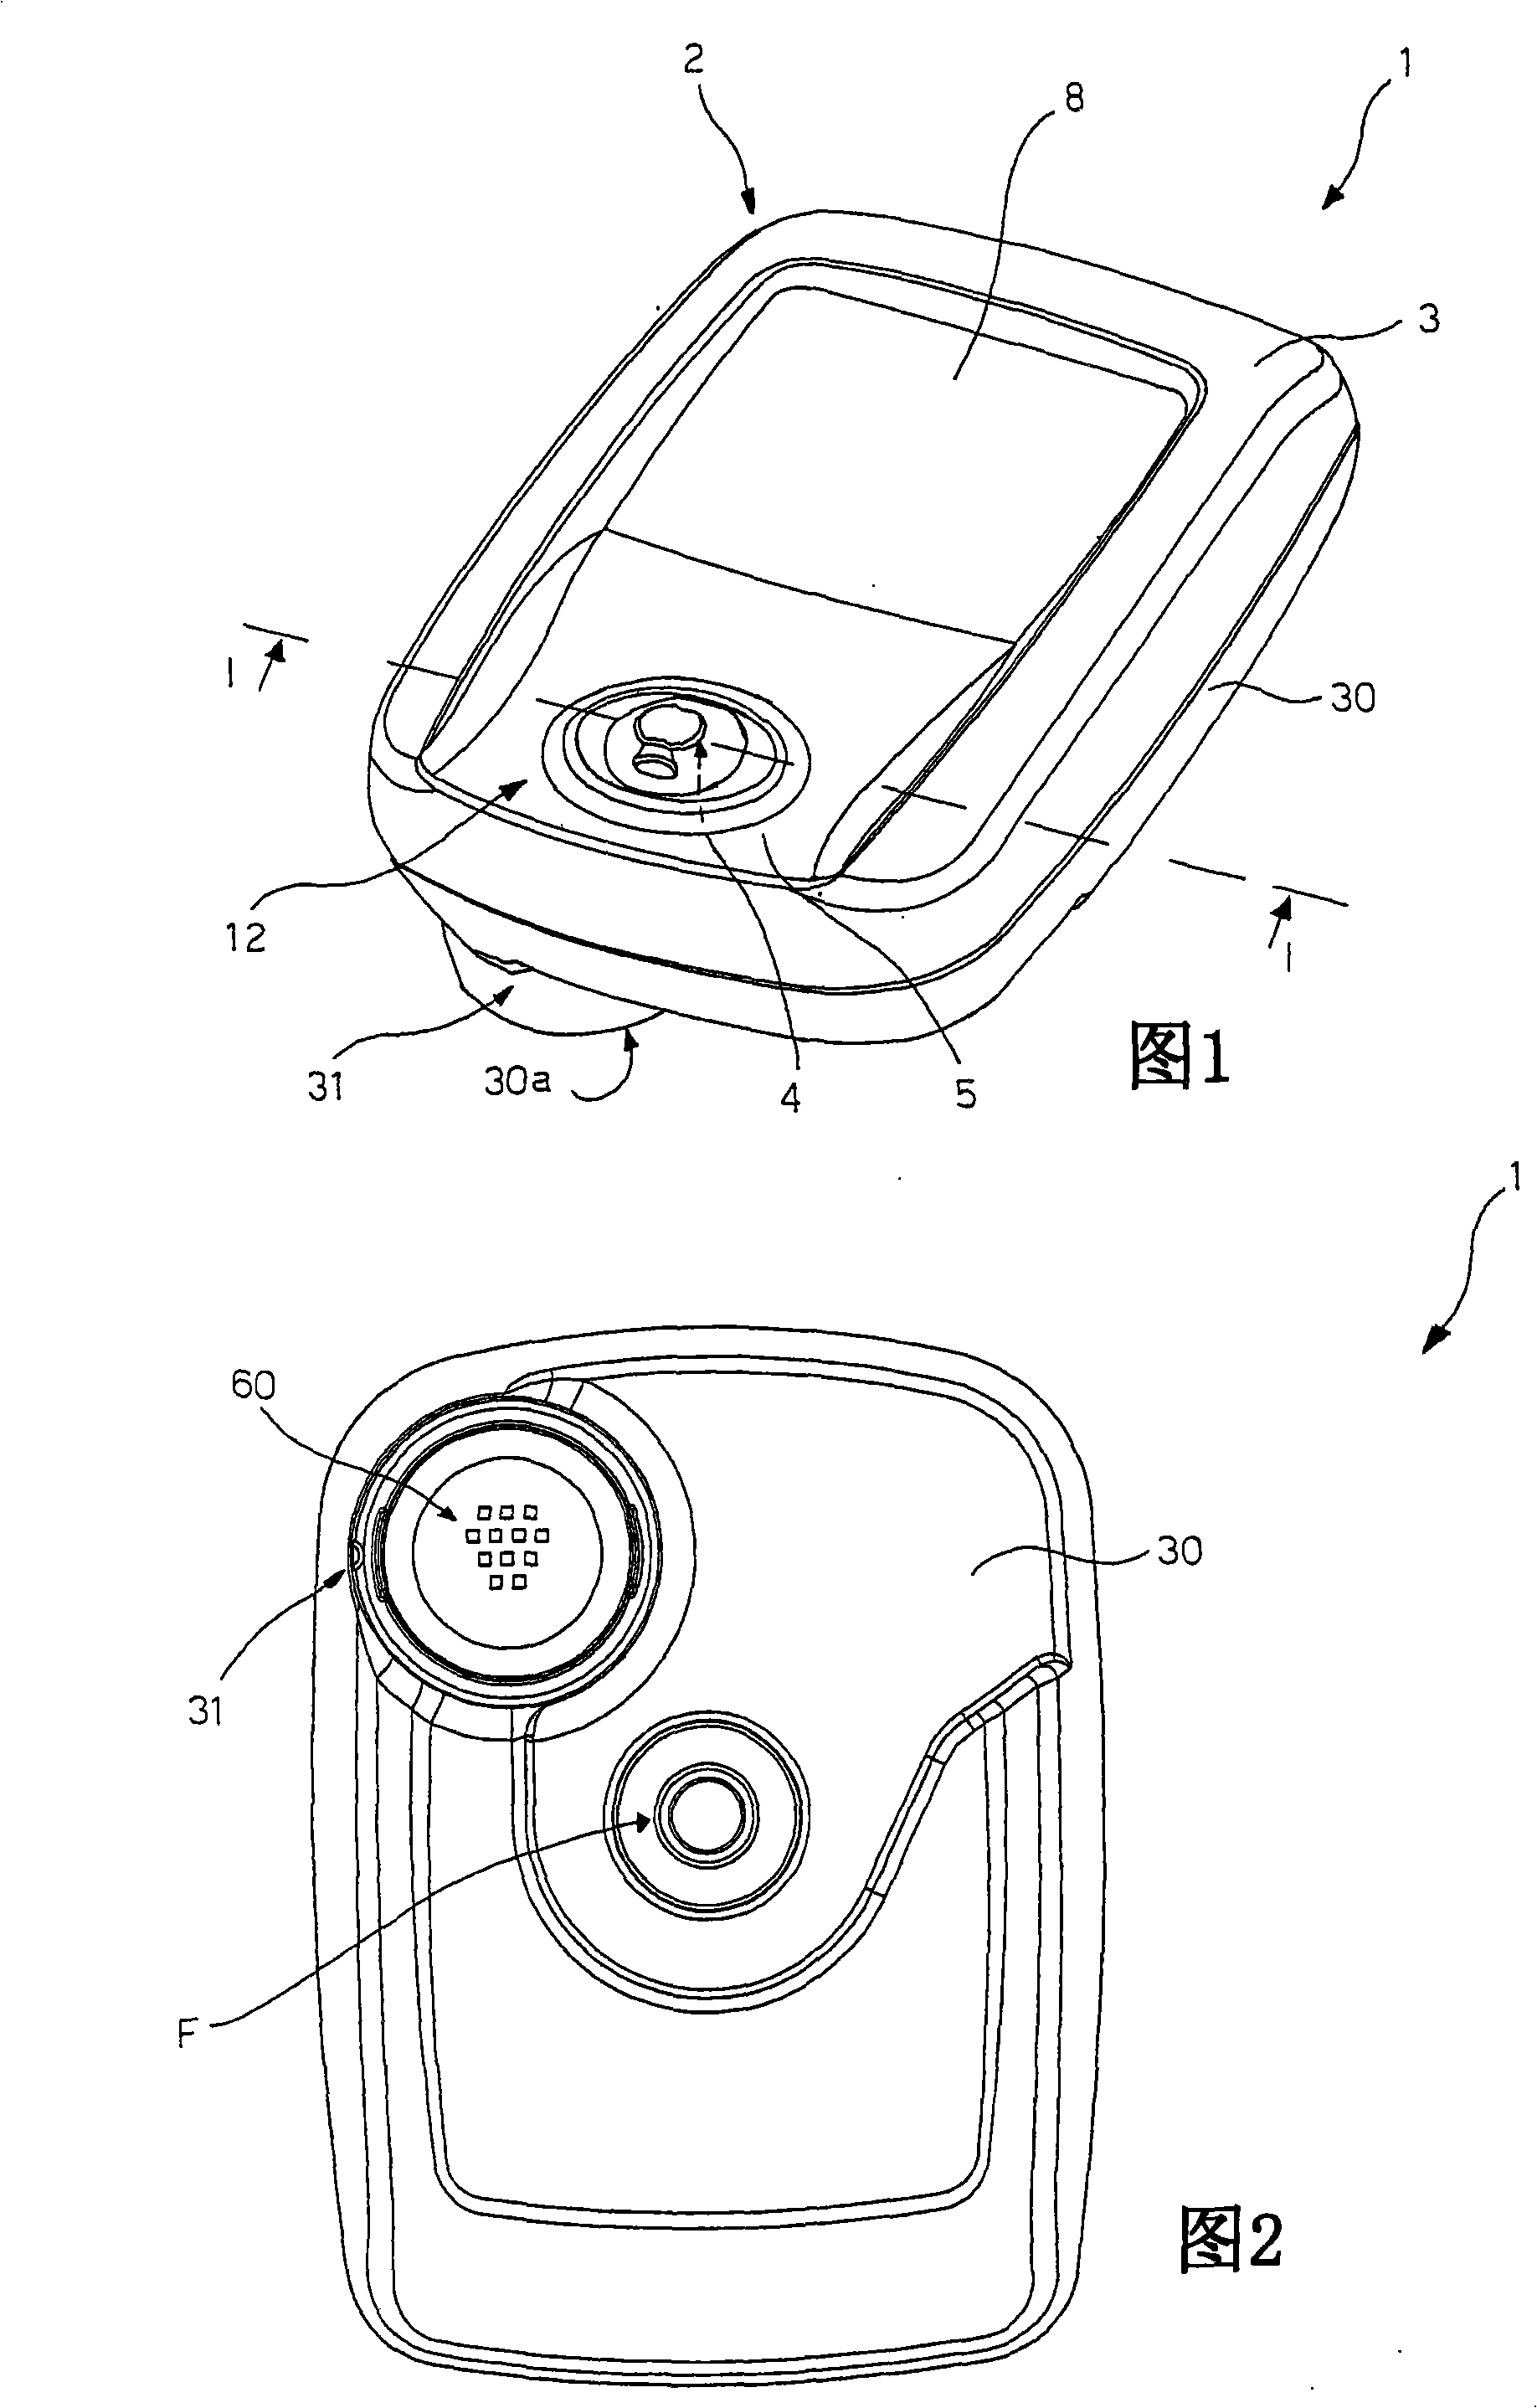 Human-bicycle interaction device